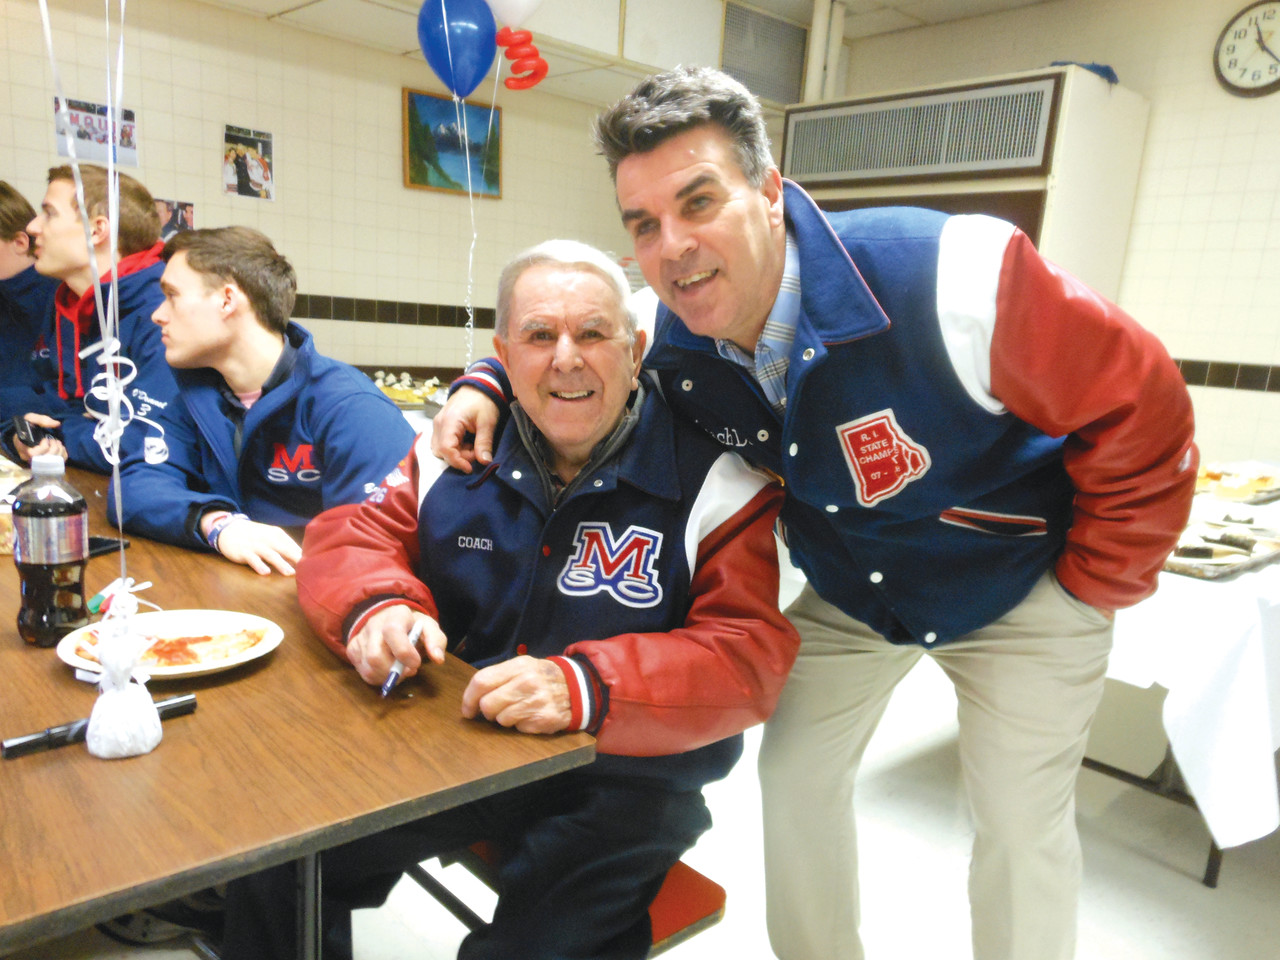 Normand “Bill” Belisle, hockey coach of 42 years at Mount St. Charles Academy, and his son, Dave, smile at an event honoring the older Belisle’s induction into the U.S. Hockey Hall of Fame last fall.